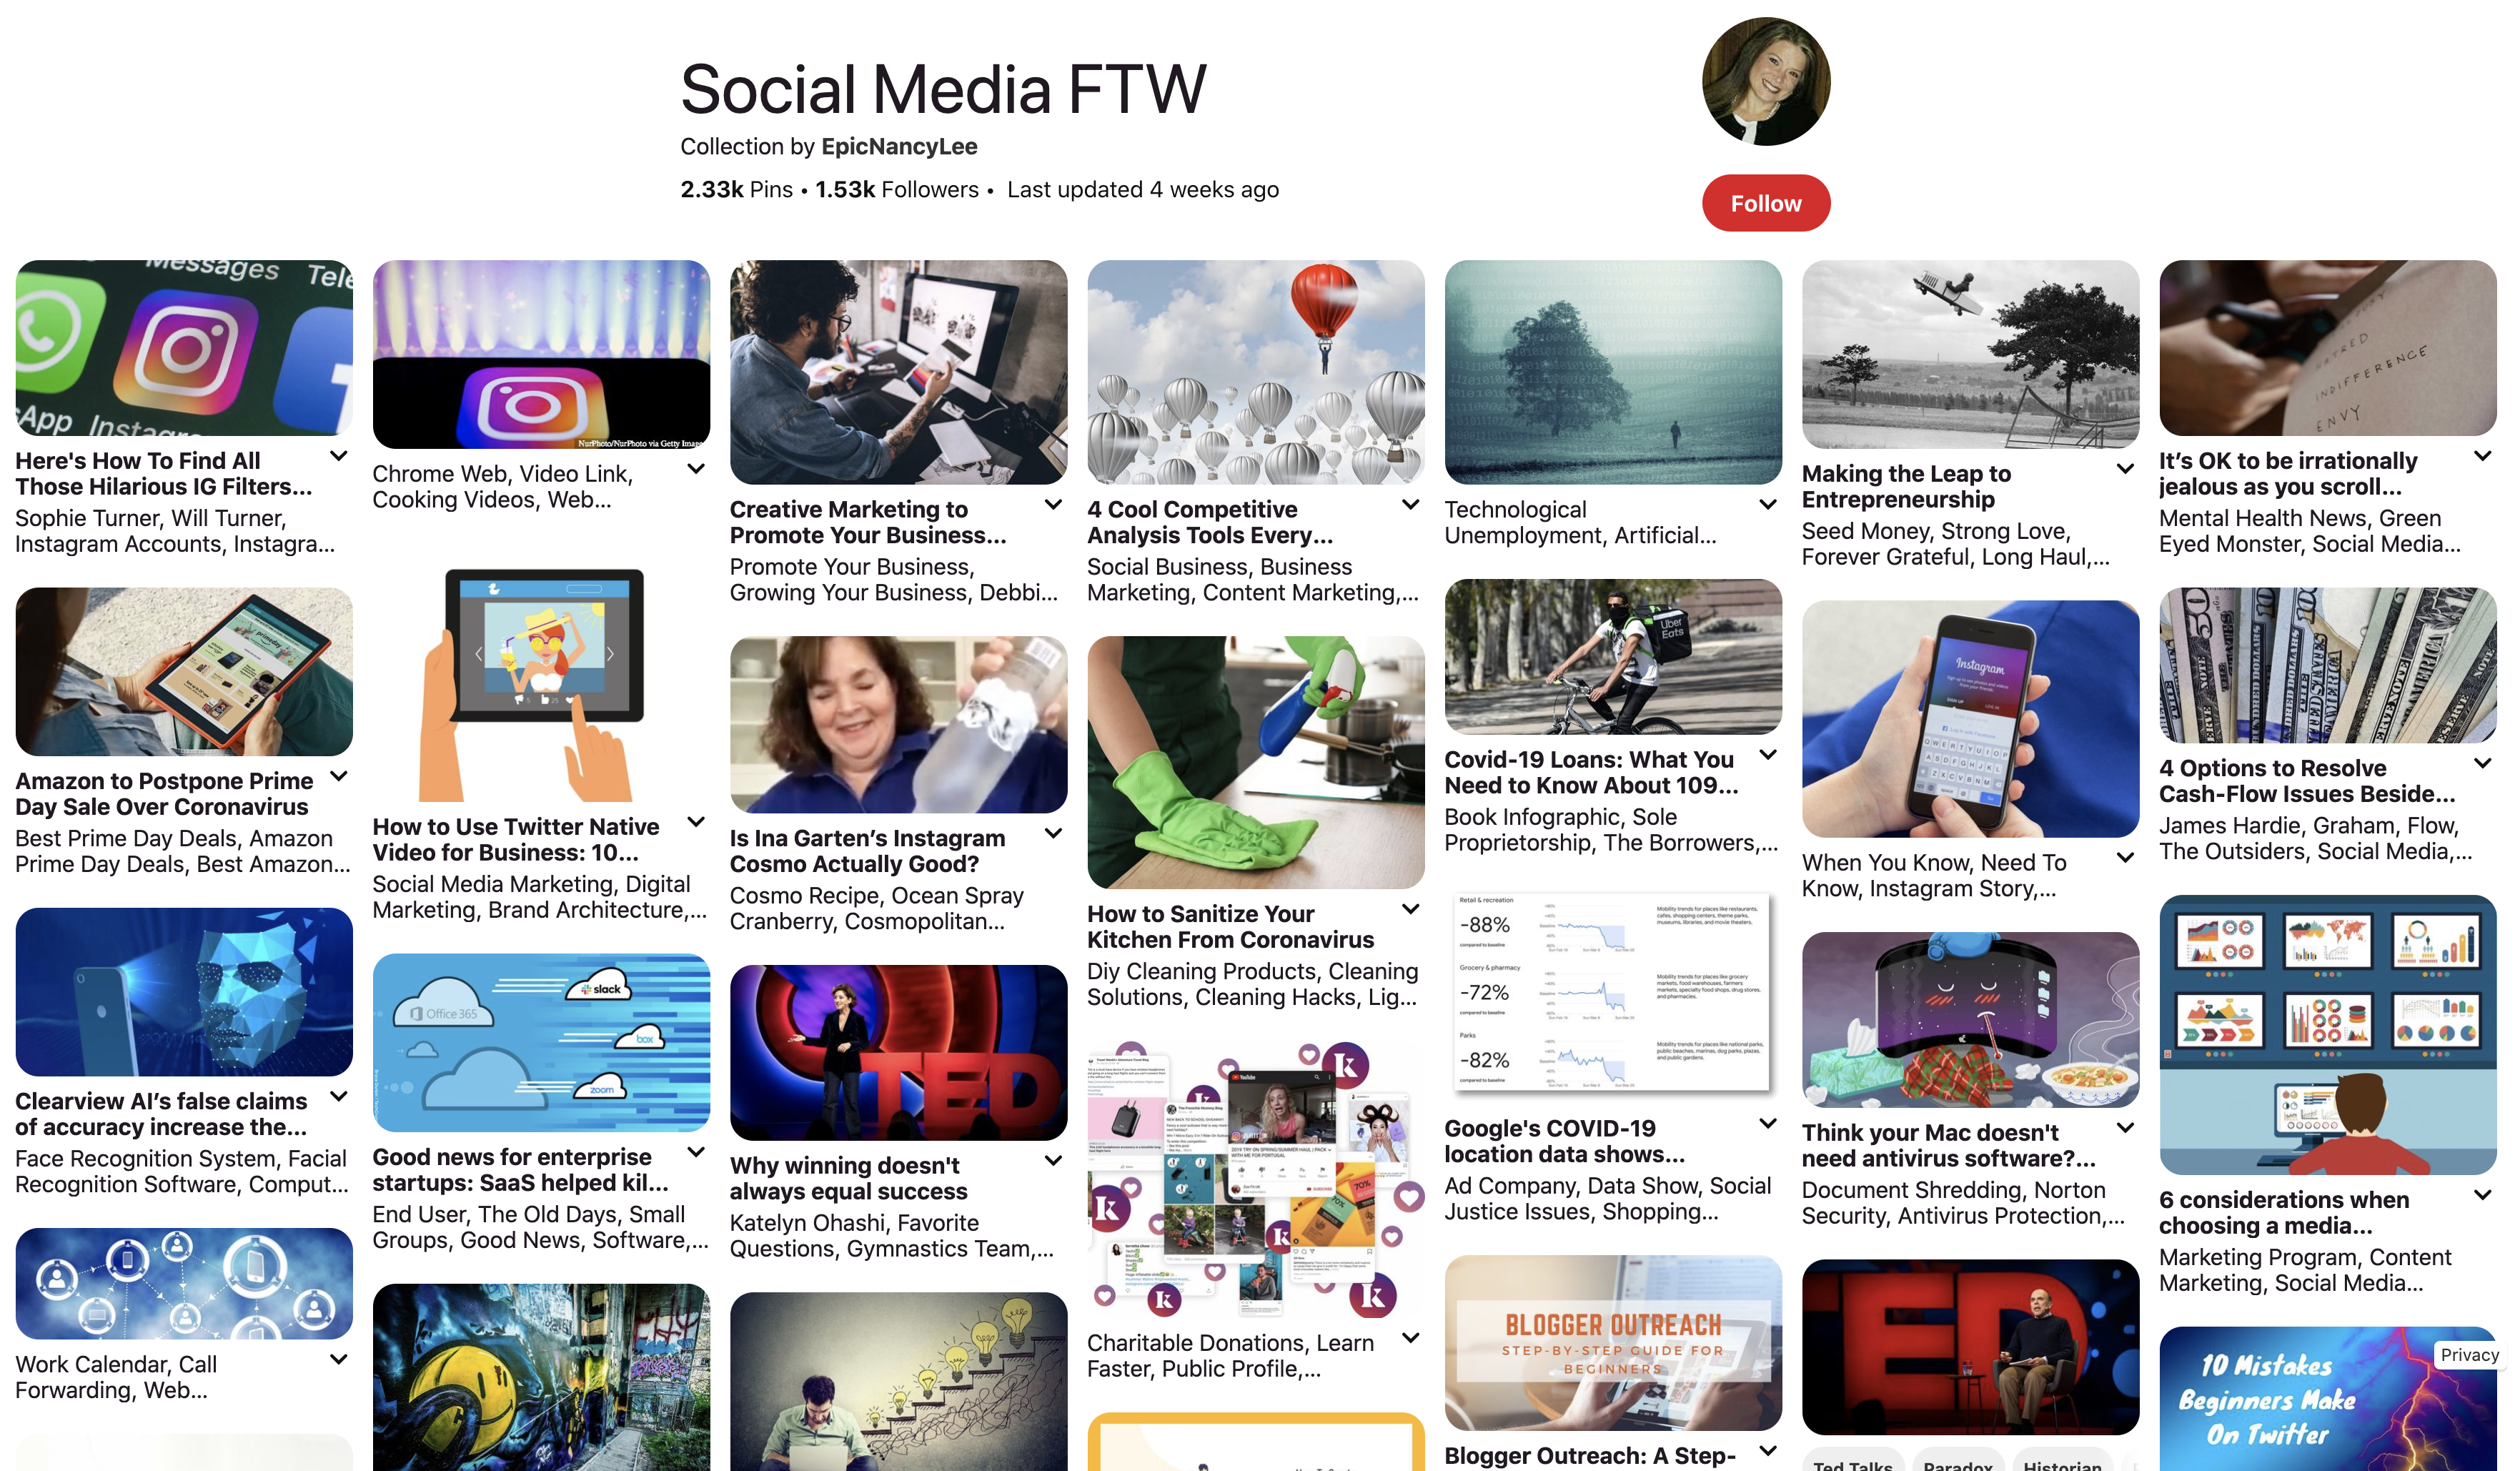 Social Media Tools and Resources on Pinterest